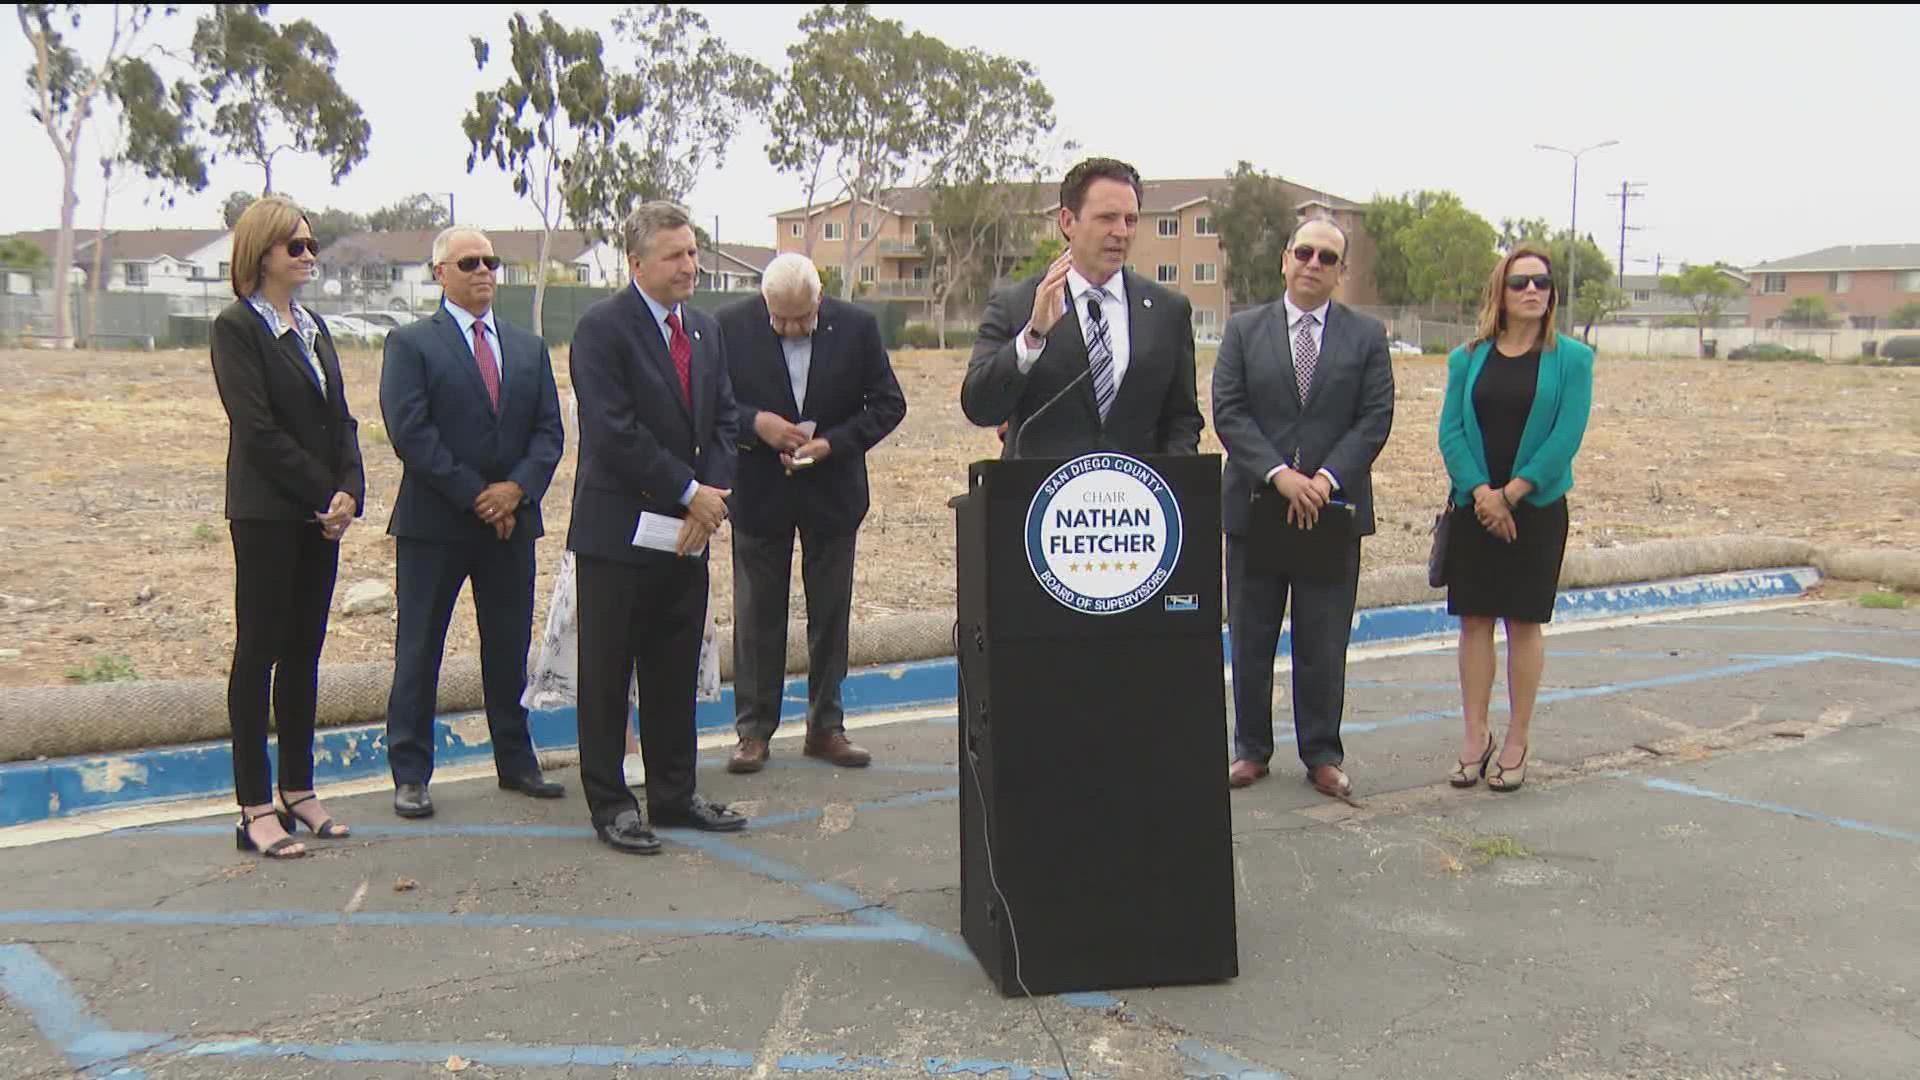 The San Diego Foundation is pledging $10 million to help projects get started. They will also pursue raising another $90 million to support the initiative.